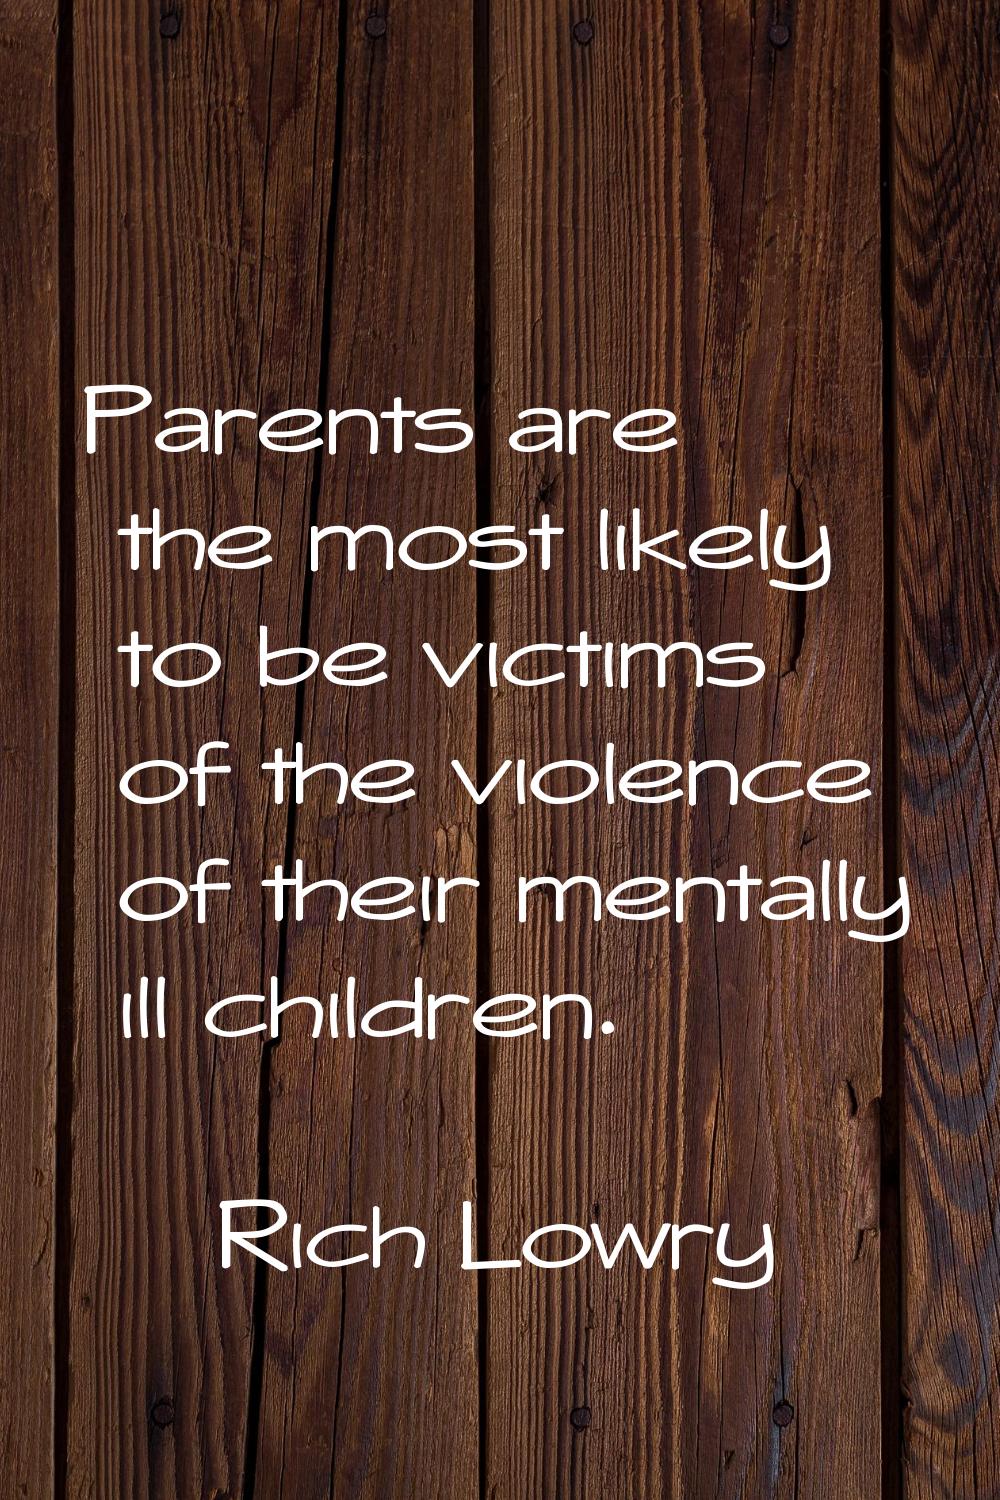 Parents are the most likely to be victims of the violence of their mentally ill children.